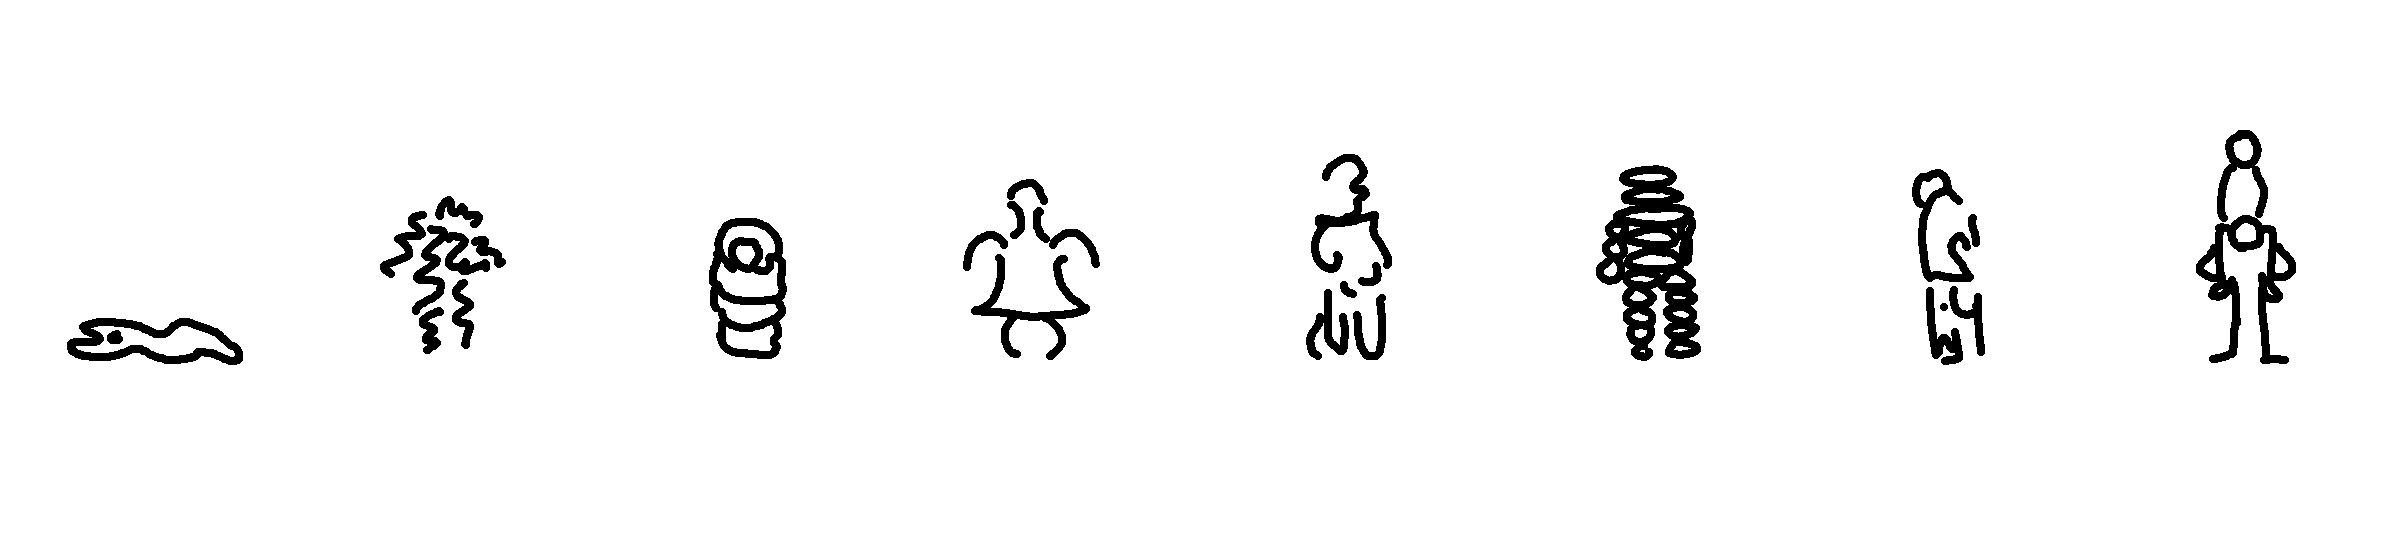 Little contour people. Drawn with black lines. Have human and animal characteristics but are unrecognizable as anything familiar.